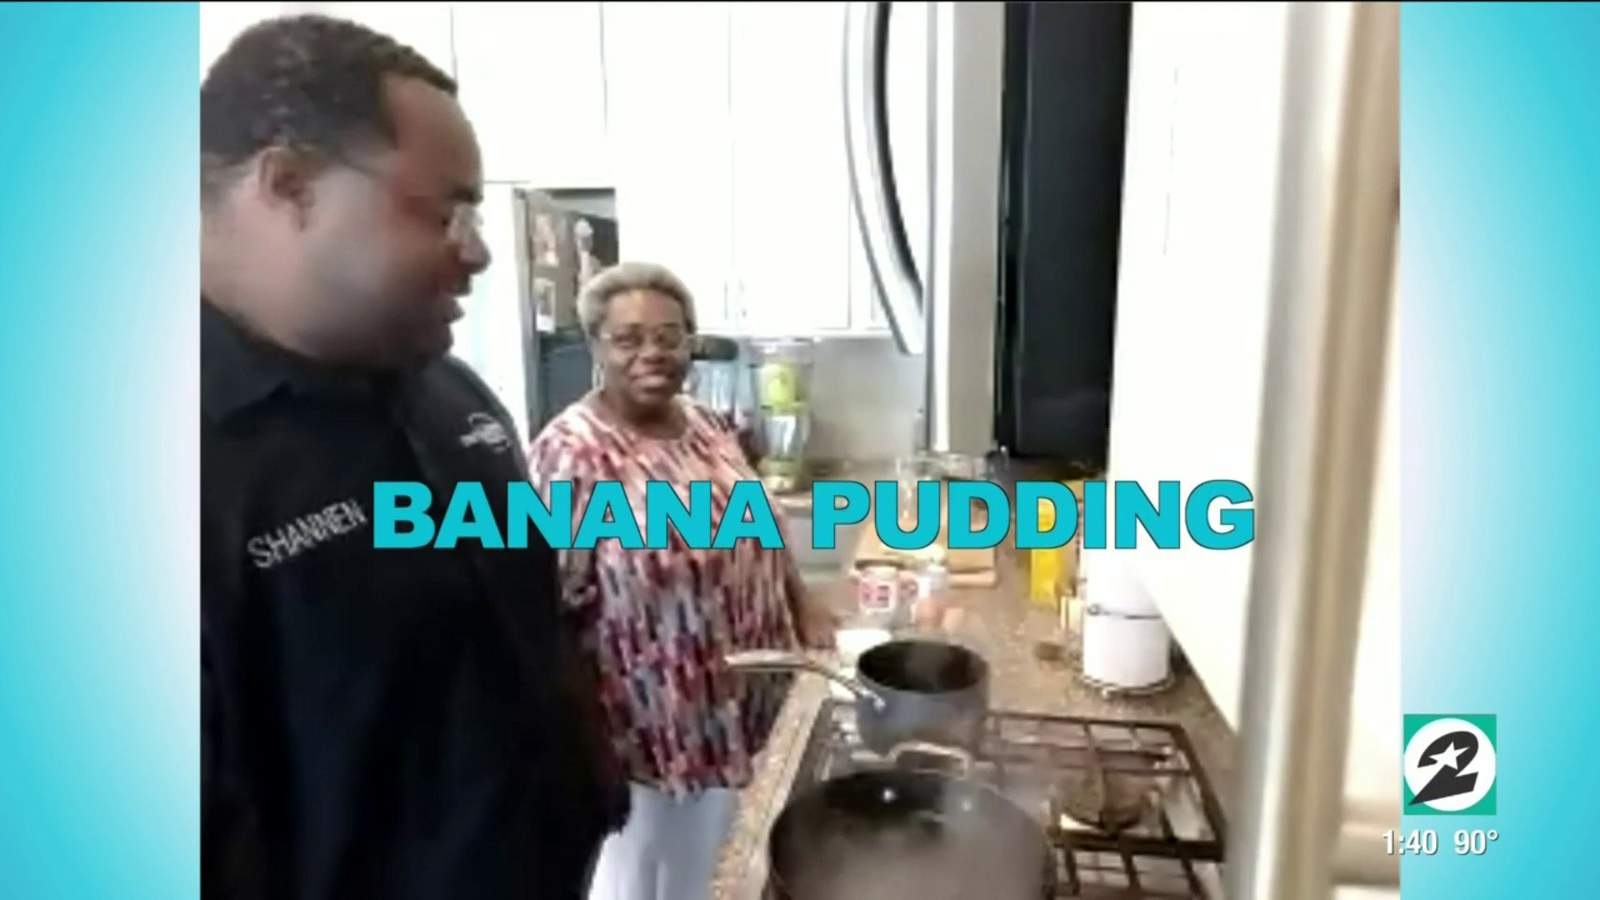 Houston’s Craft Burger owner leaves the grill for a lesson in mom’s banana pudding | HOUSTON LIFE | KPRC 2